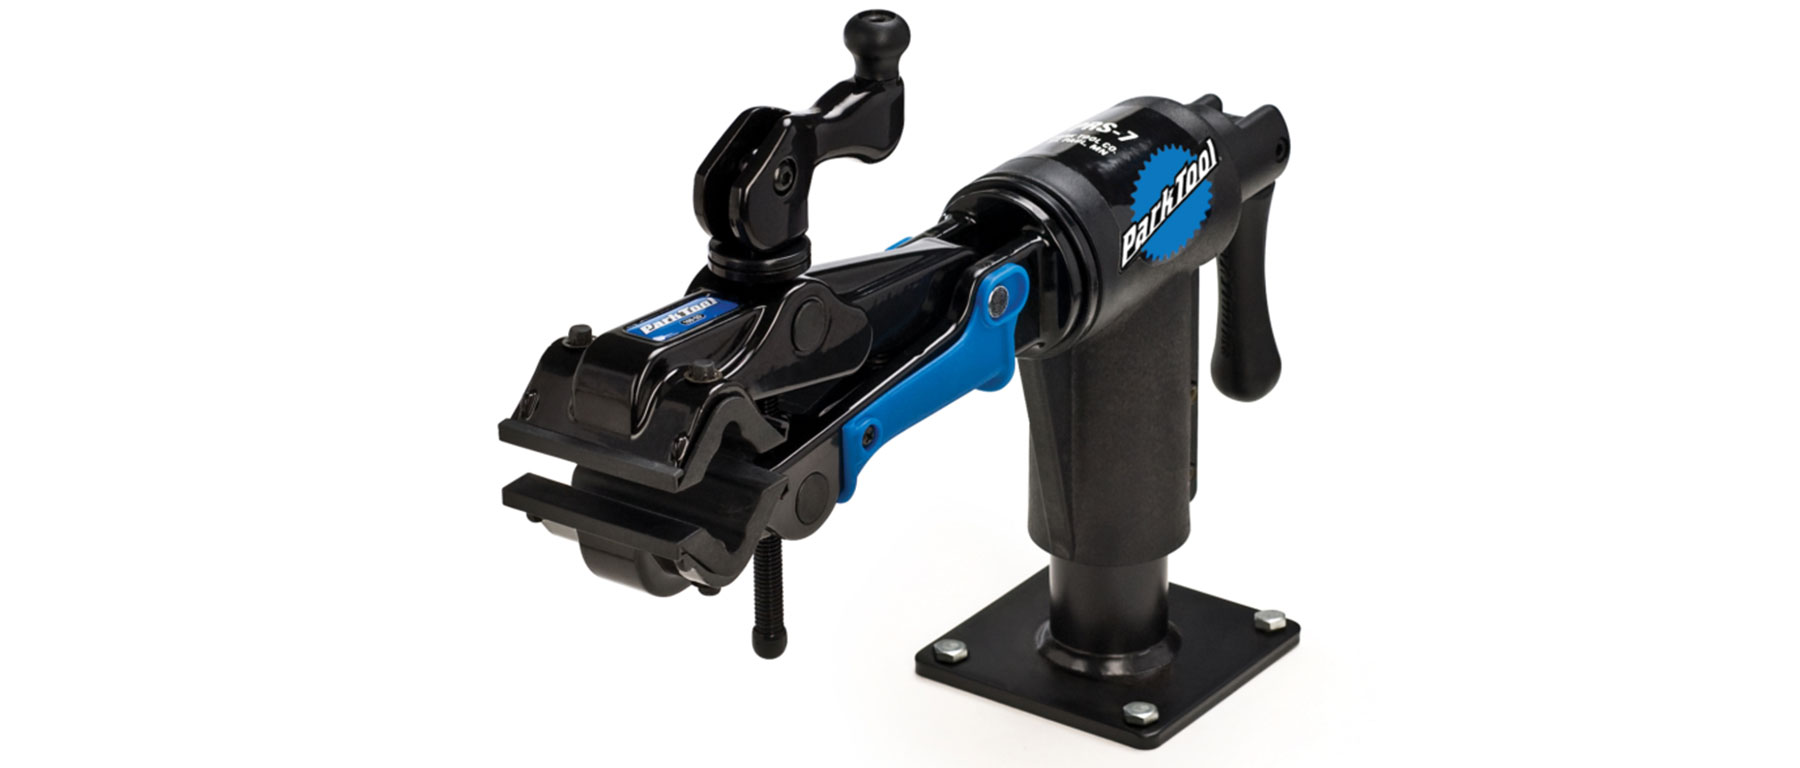 Park Tool PRS-7 Bench Mount Repair Stand